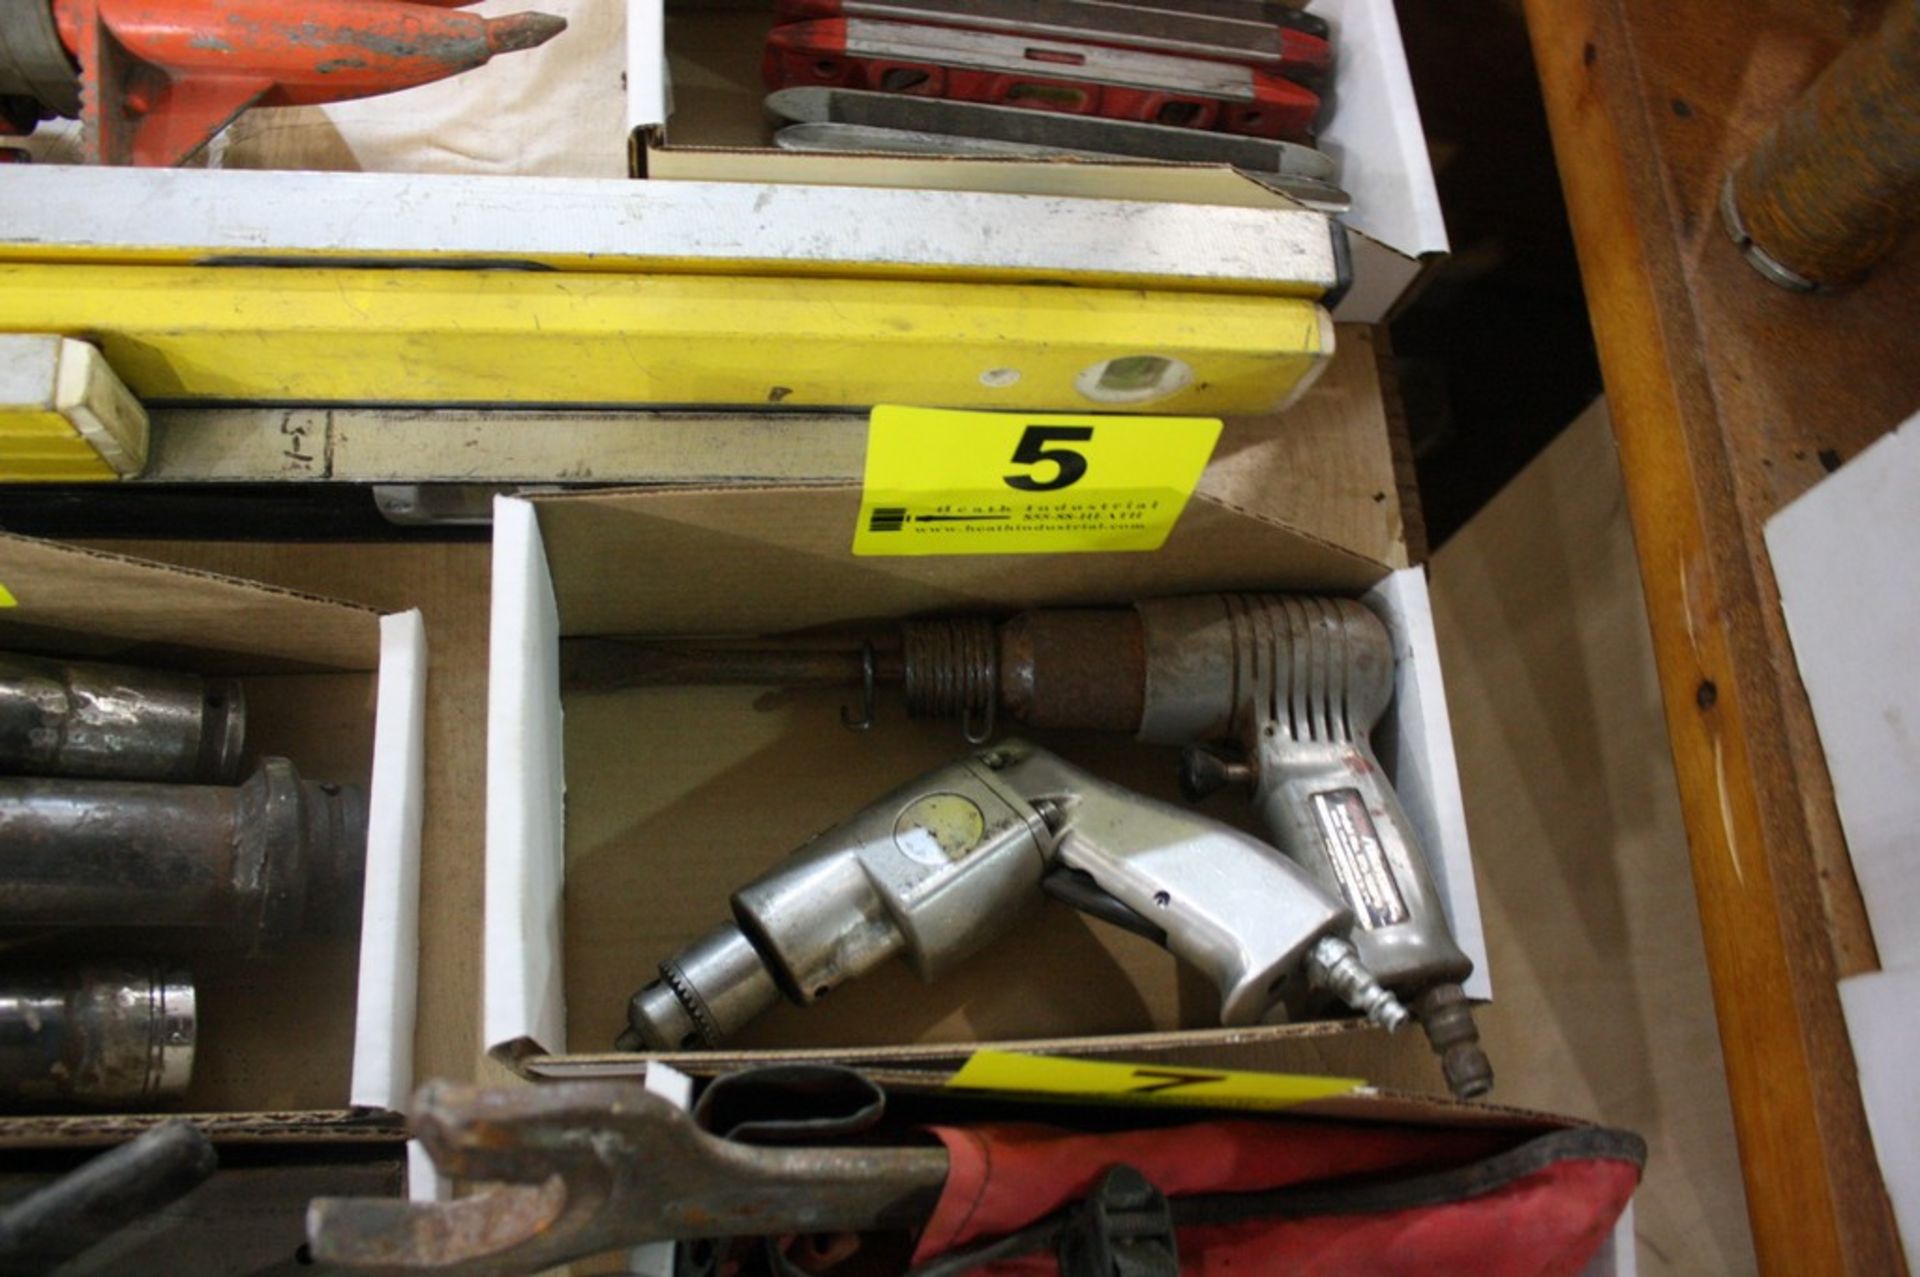 LOT (1) ROCKWELL PNEUMATIC DRILL AND (1) CRAFTSMAN PNEUMATIC HAMMER